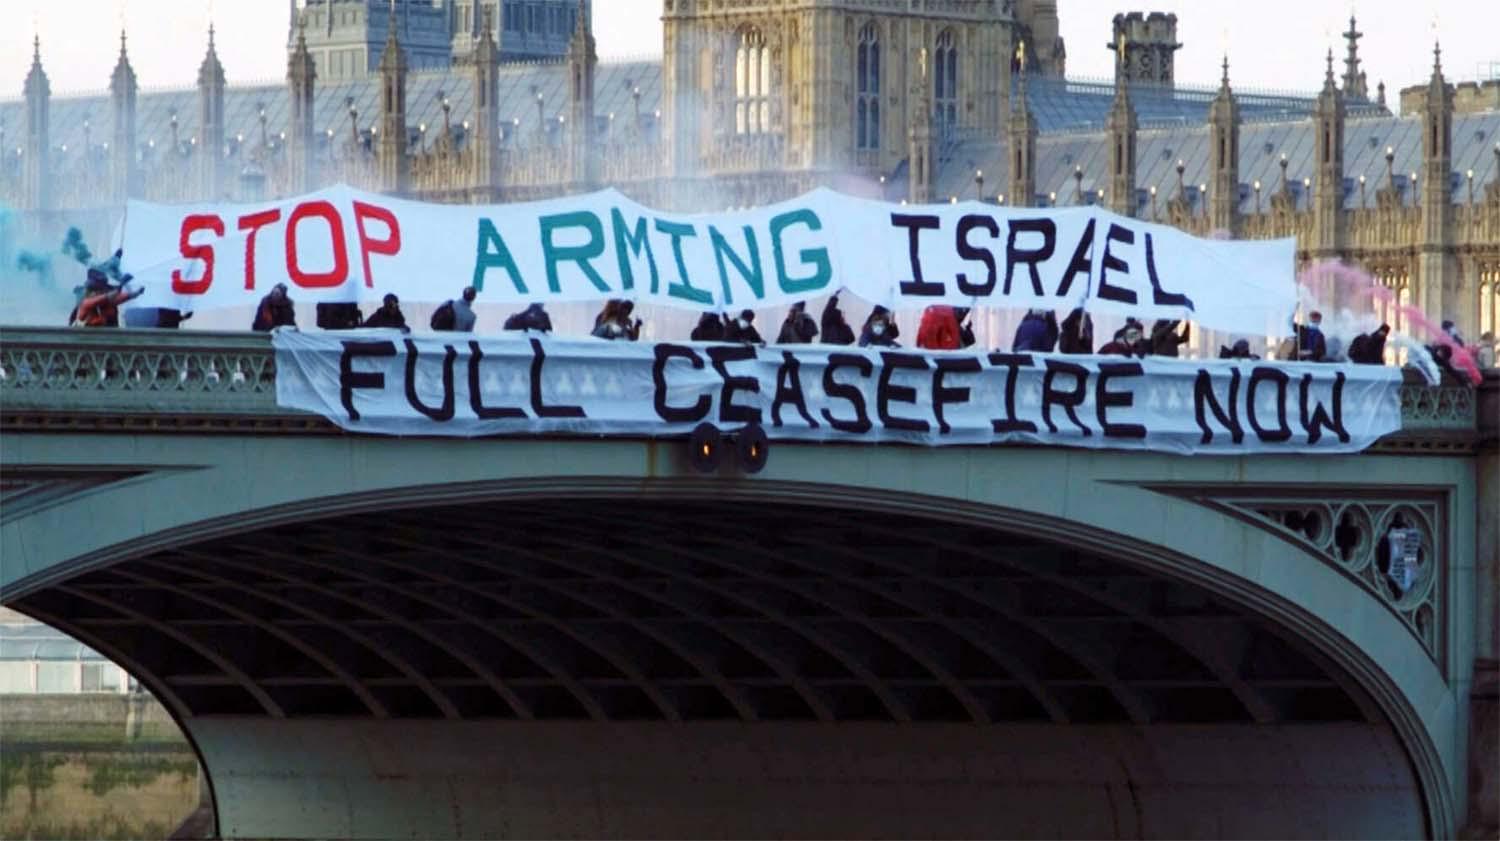 Pro-Palestinian activists unflur banners calling on the British government to demand a full ceasefire in Gaza